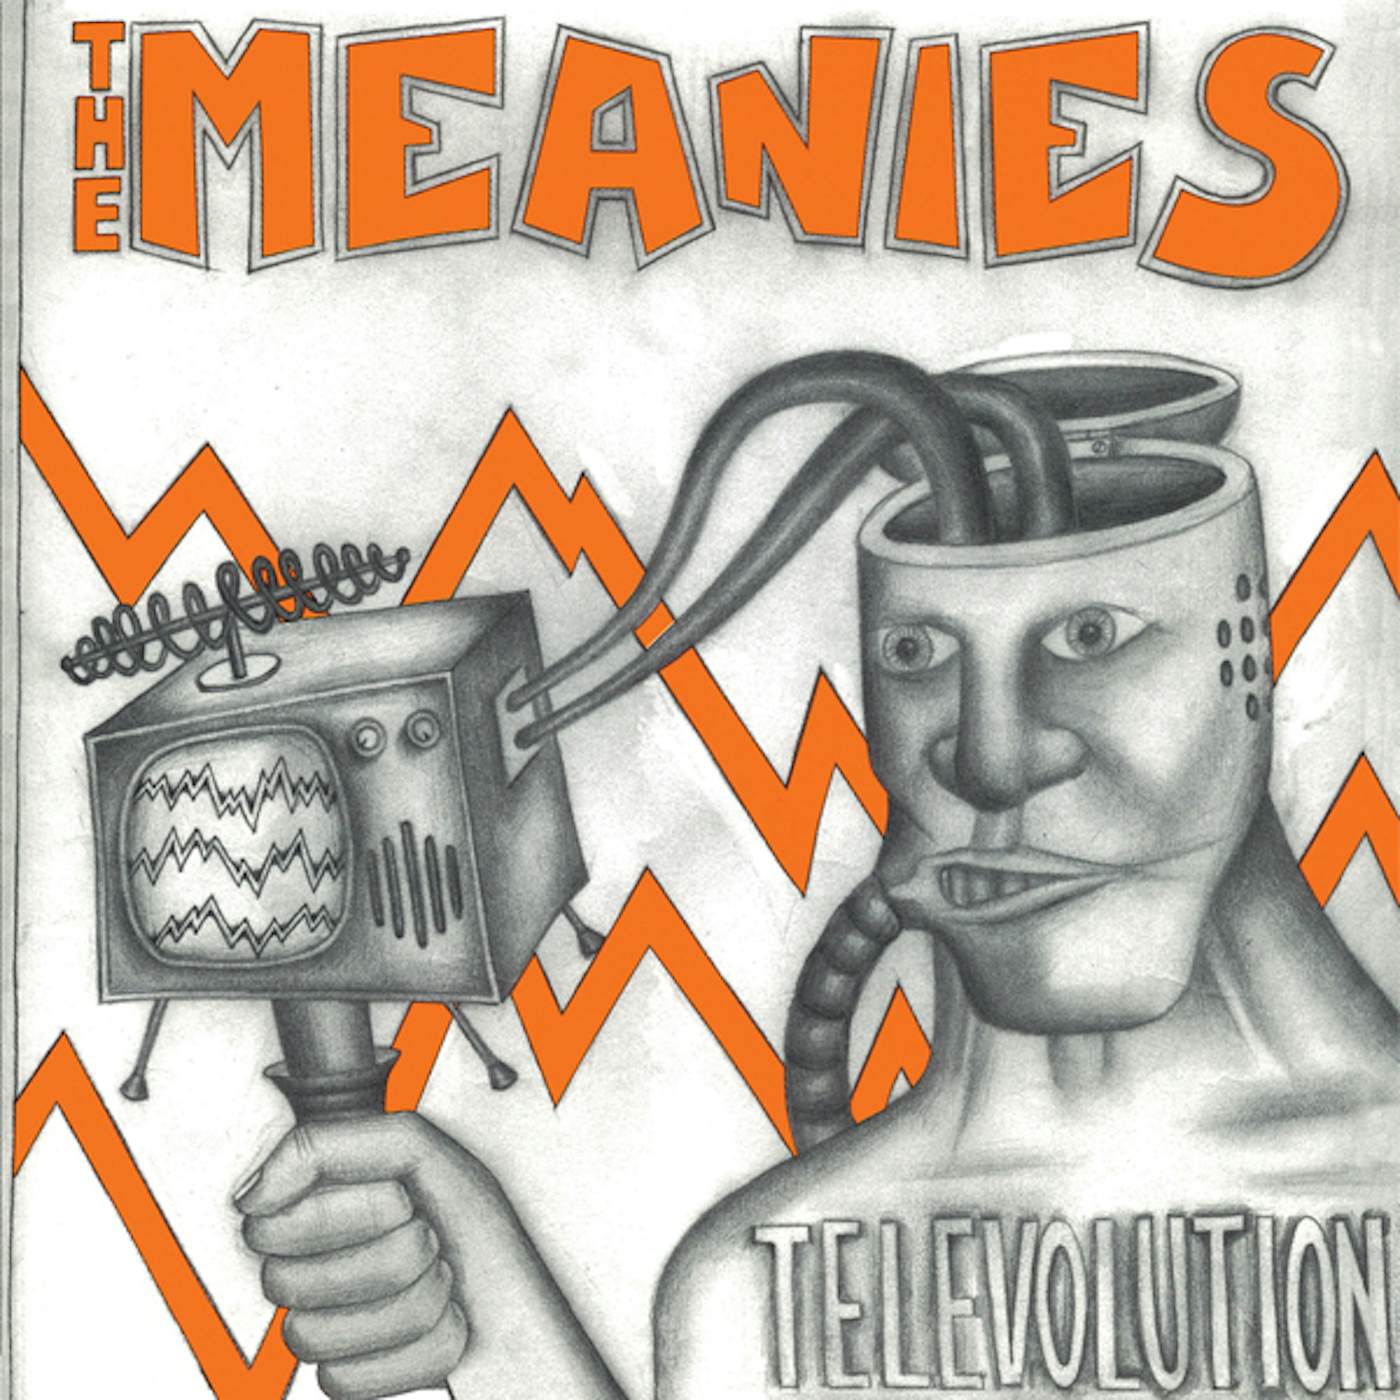 The Meanies Televolution Vinyl Record